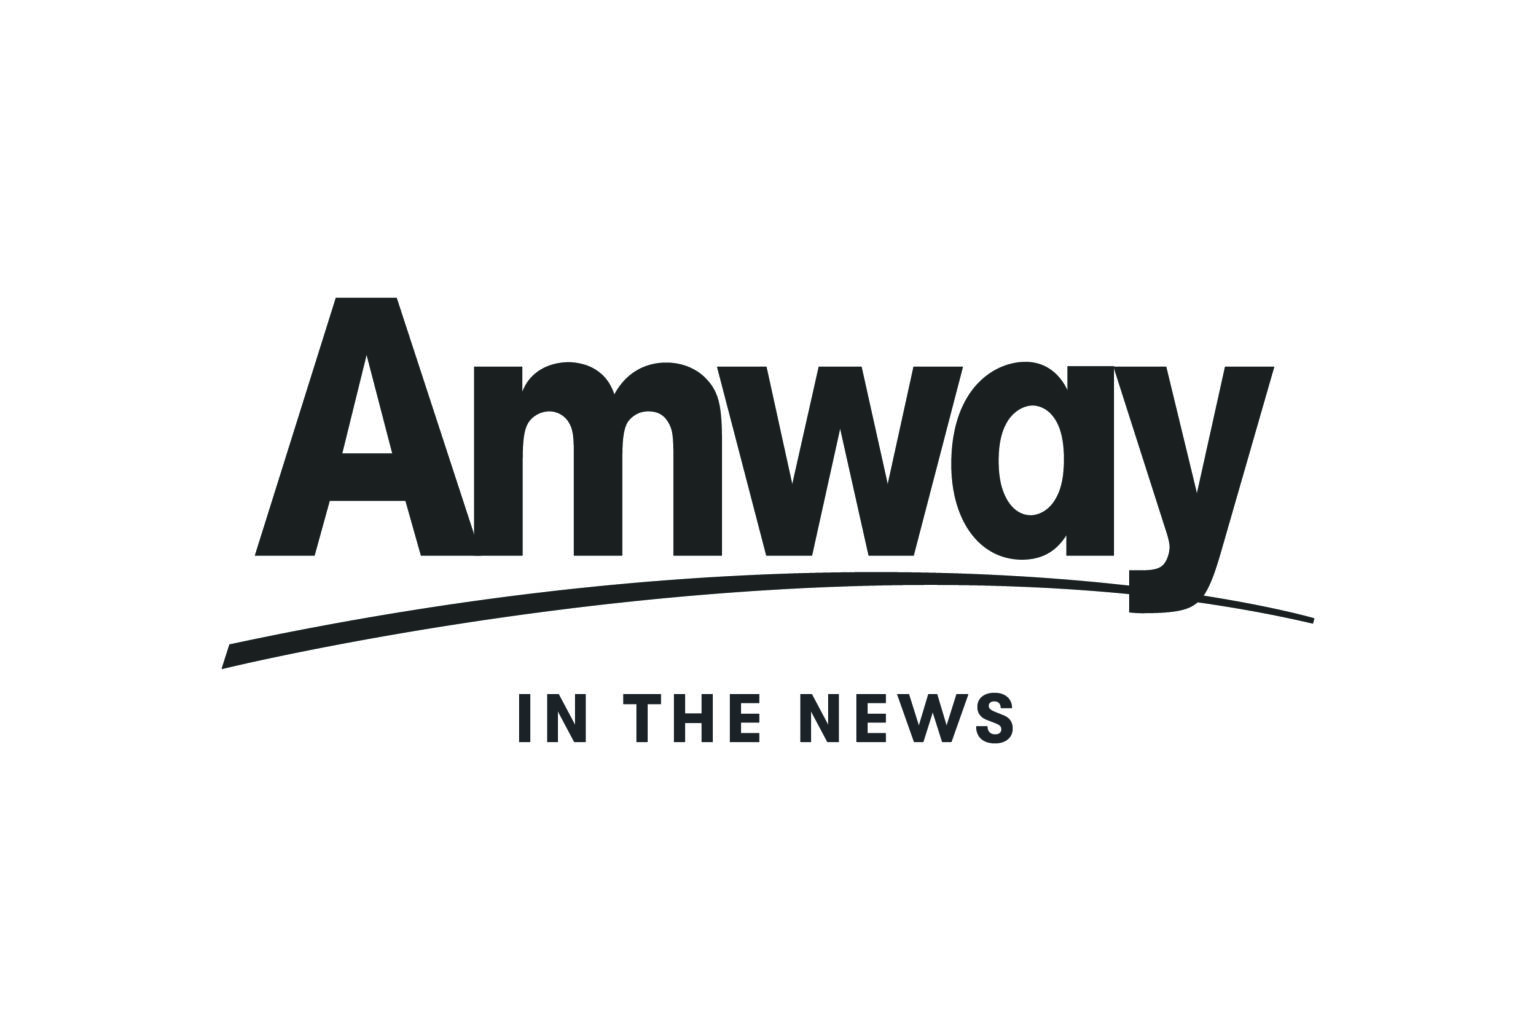 Amway statement on COVID19